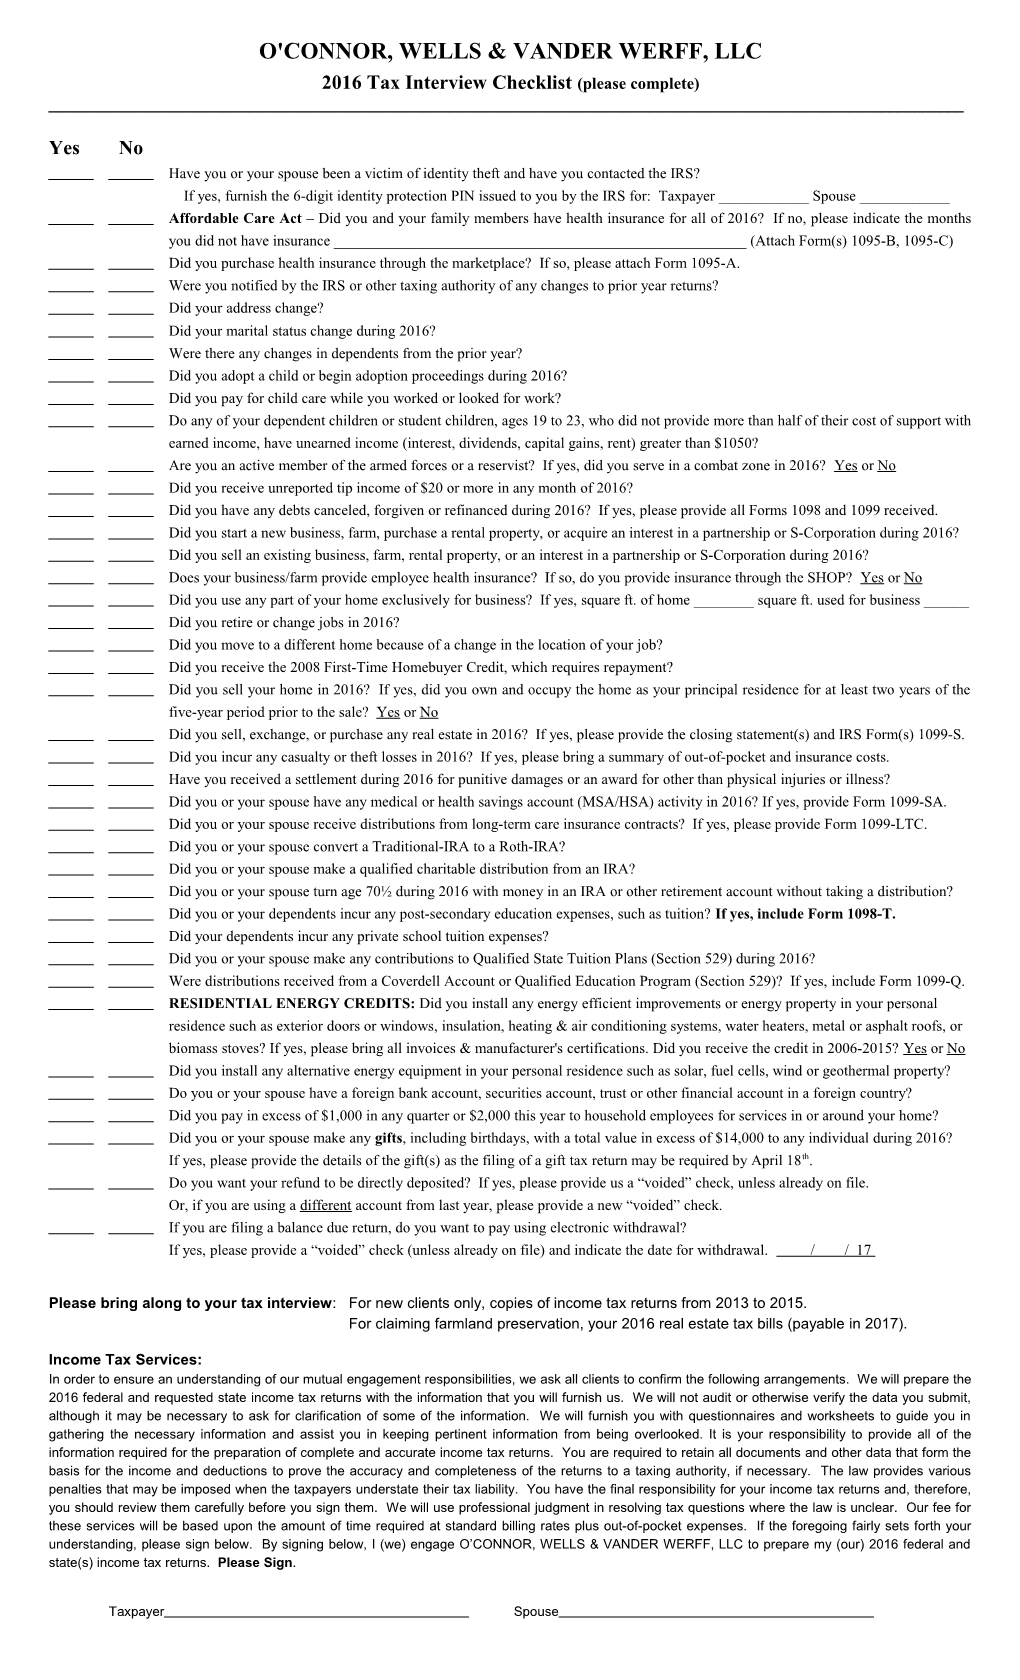 Client Questionnaire for One-Time Events